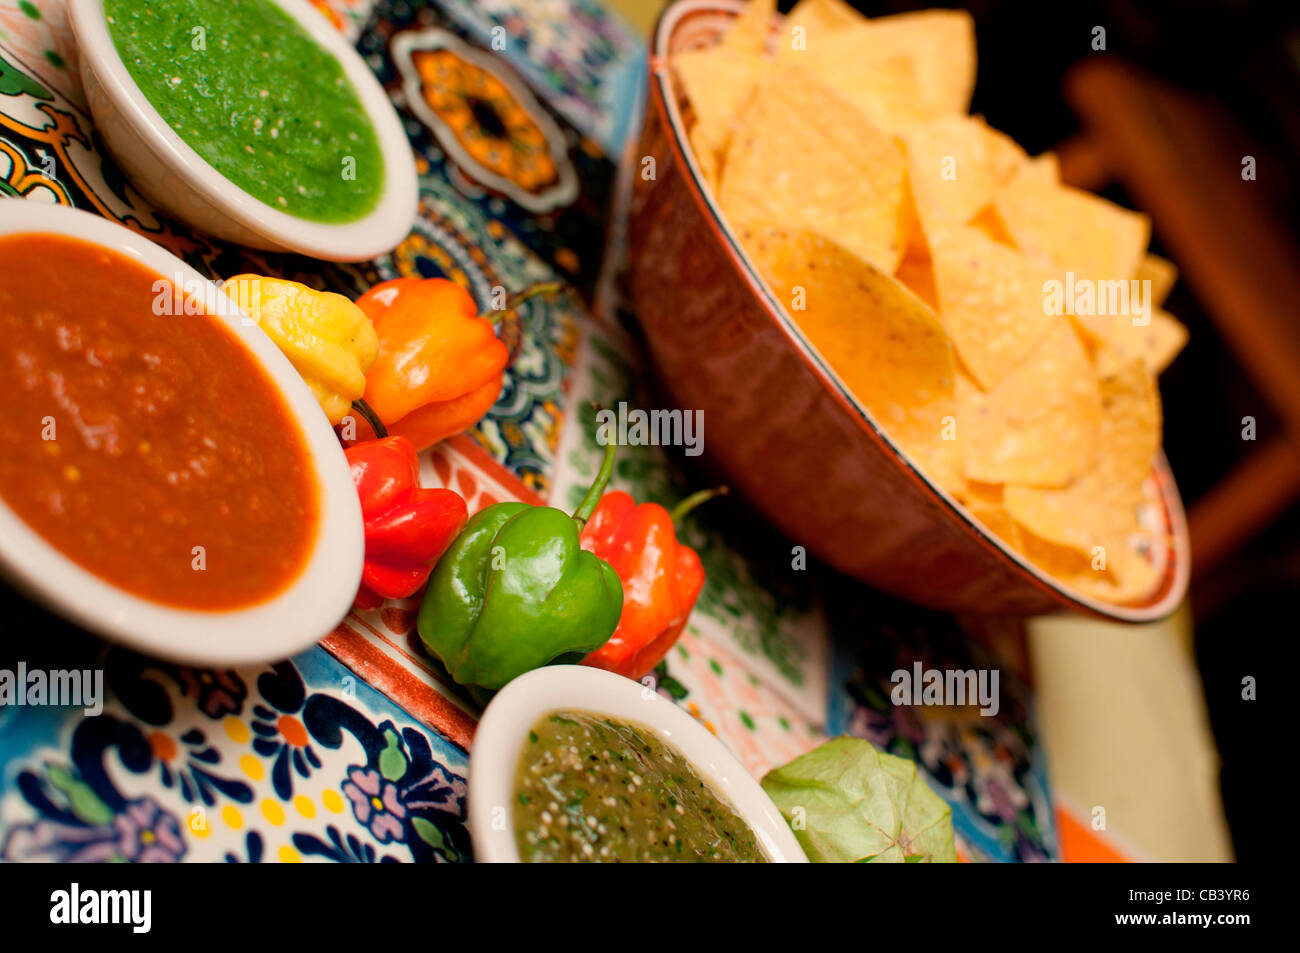 Close up of tortilla chips, peppers and salsa on colored tiles Stock Photo